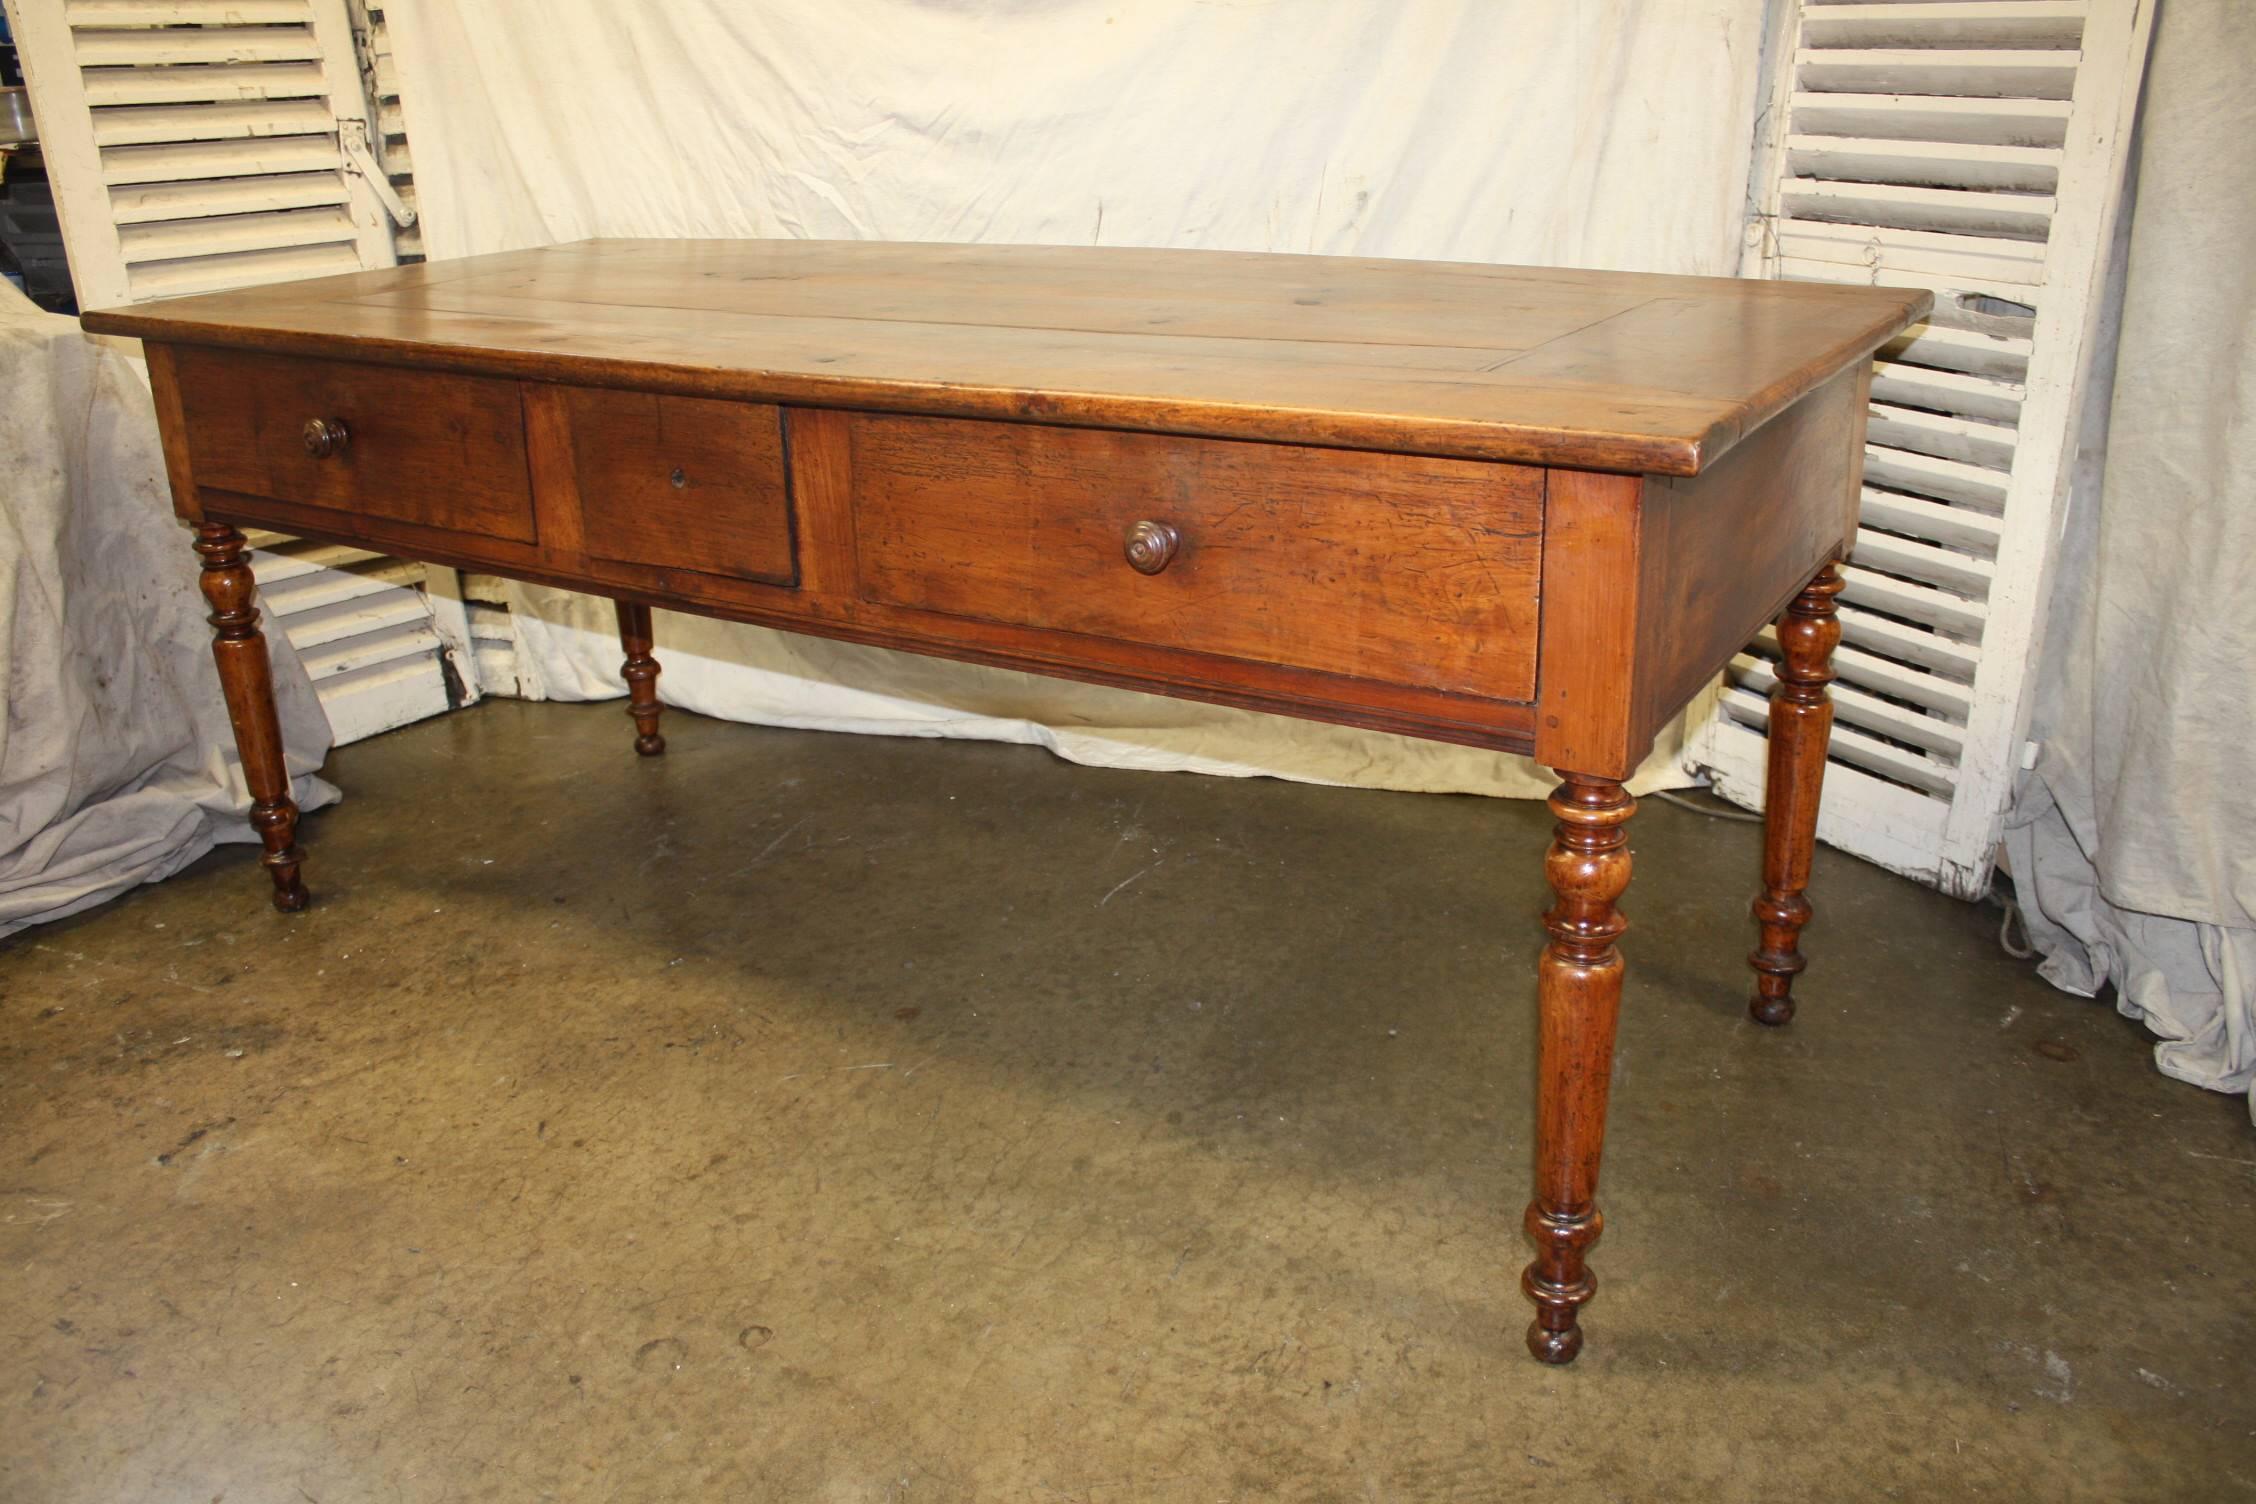 Beautiful mid-19th century French table. The wood is in walnut and the table has one extension on one side.